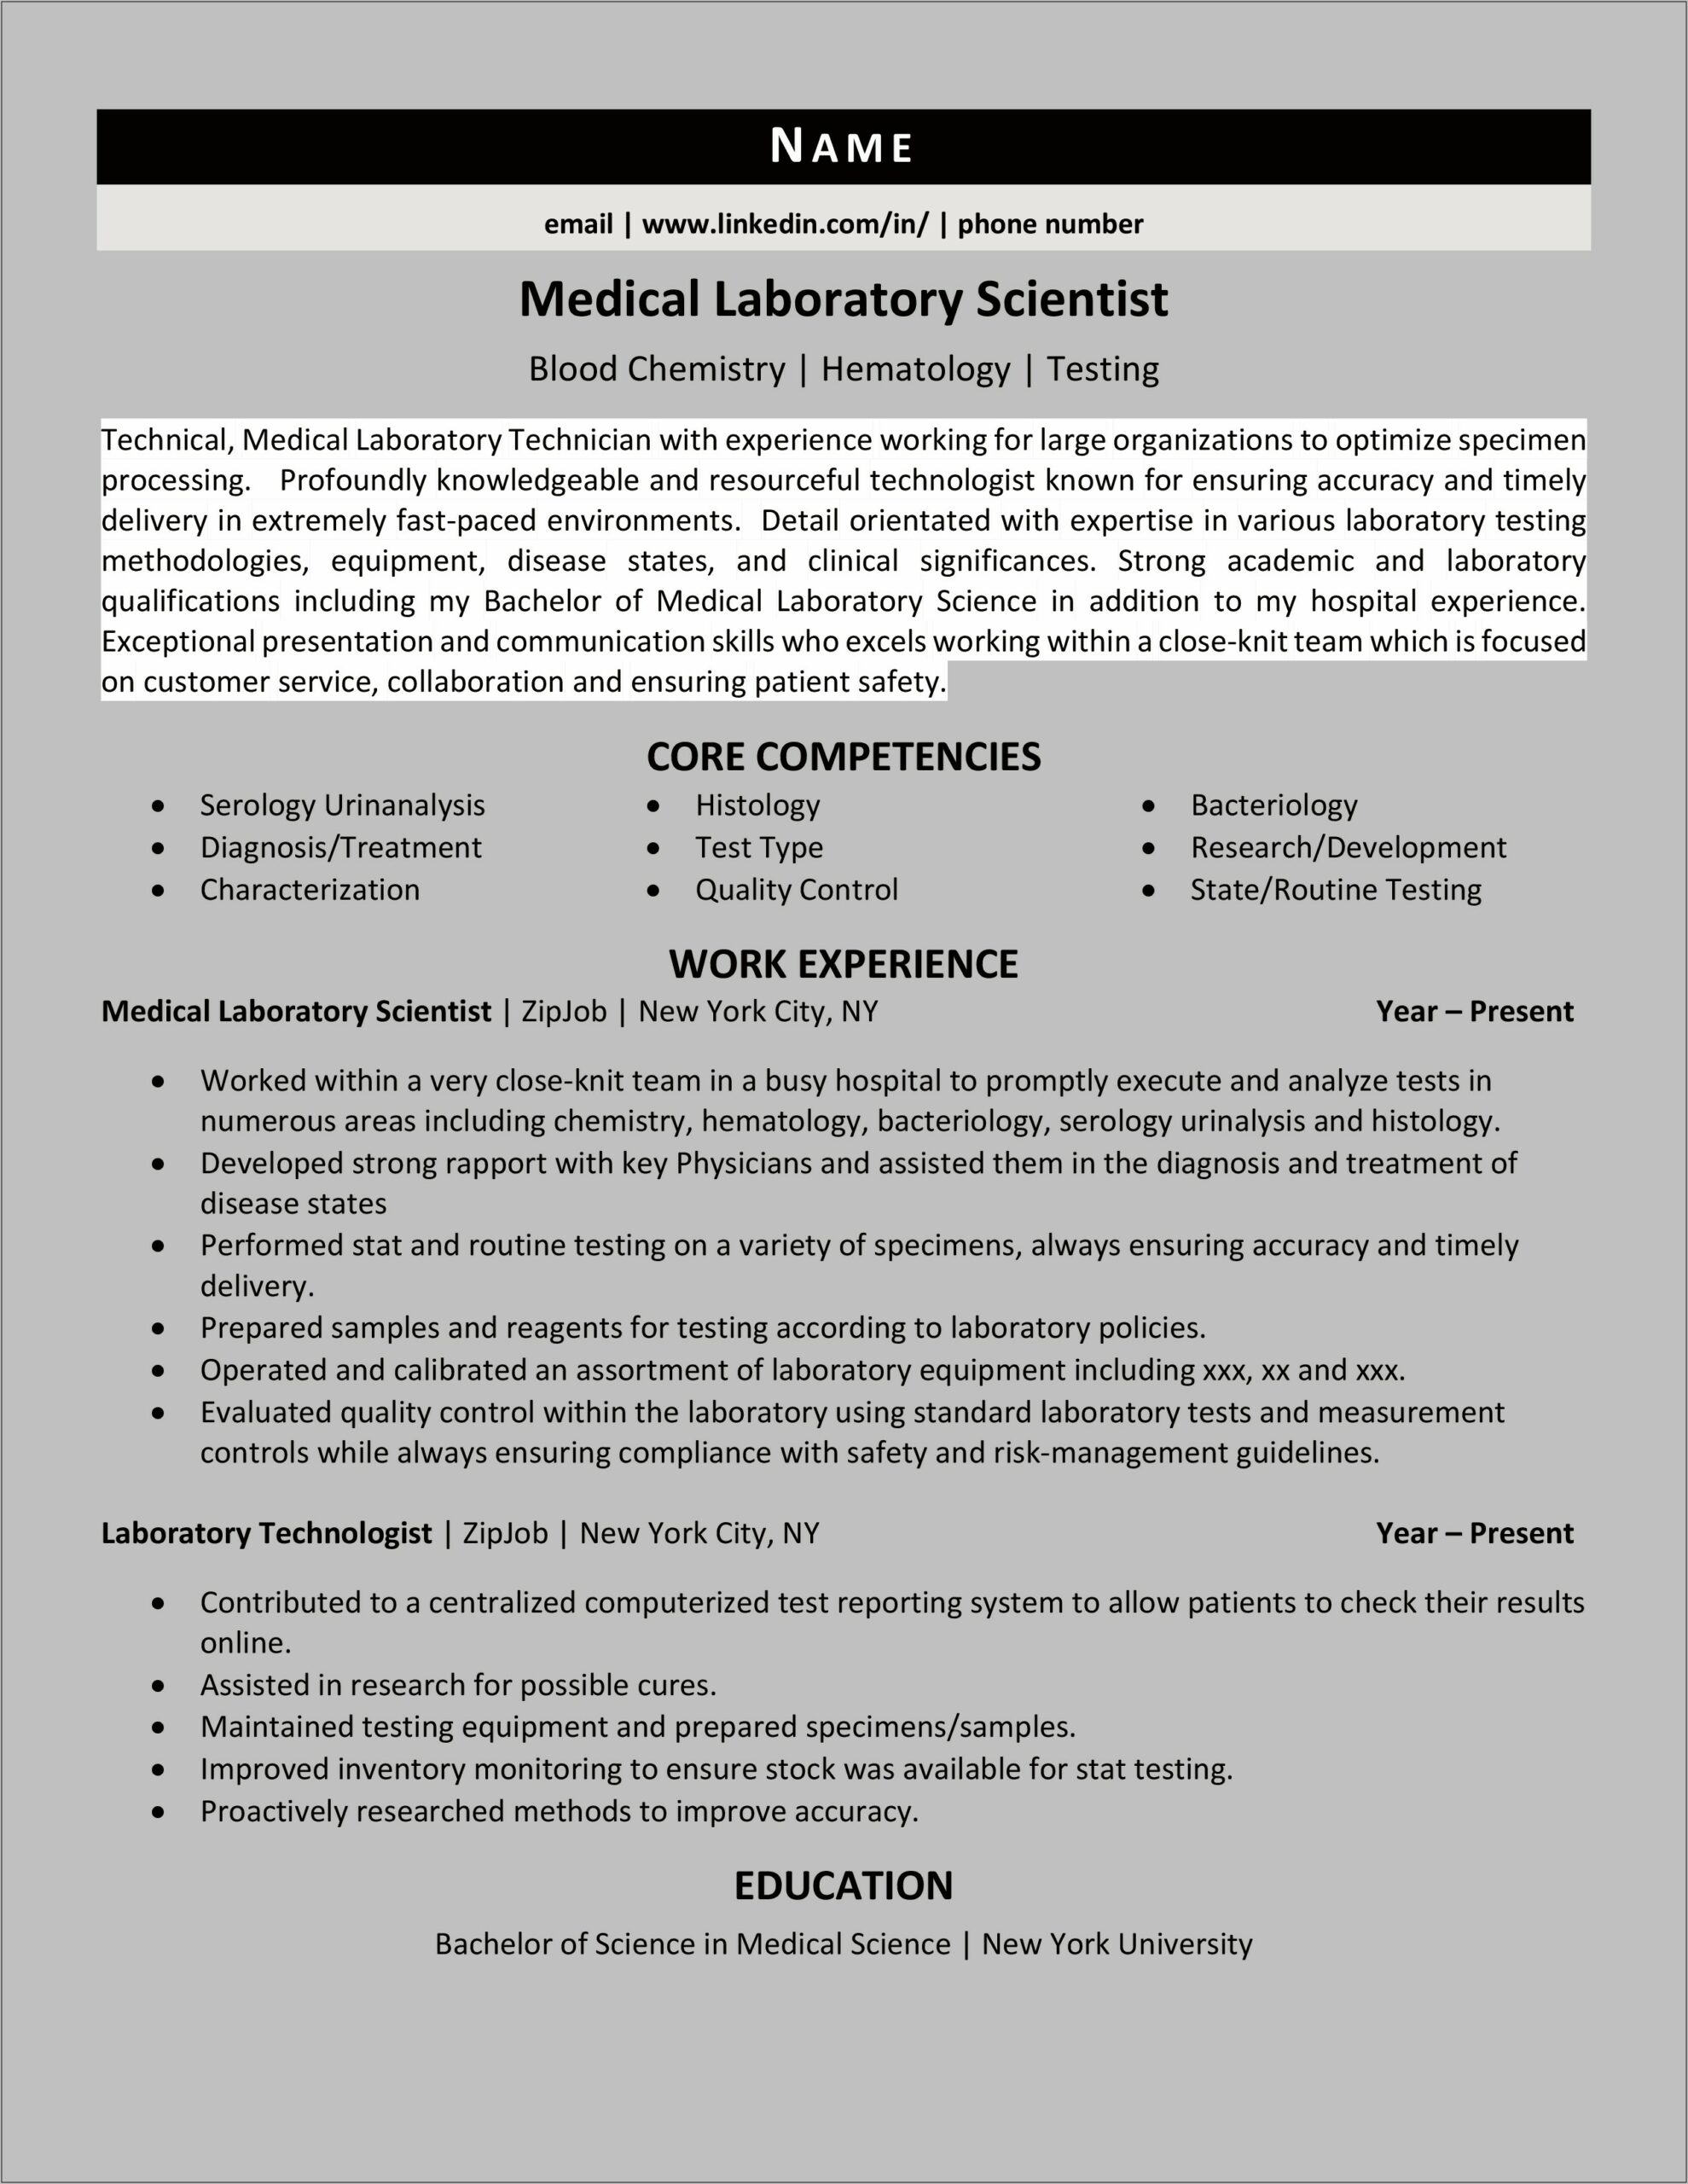 Sample Resume To Apply For Lab